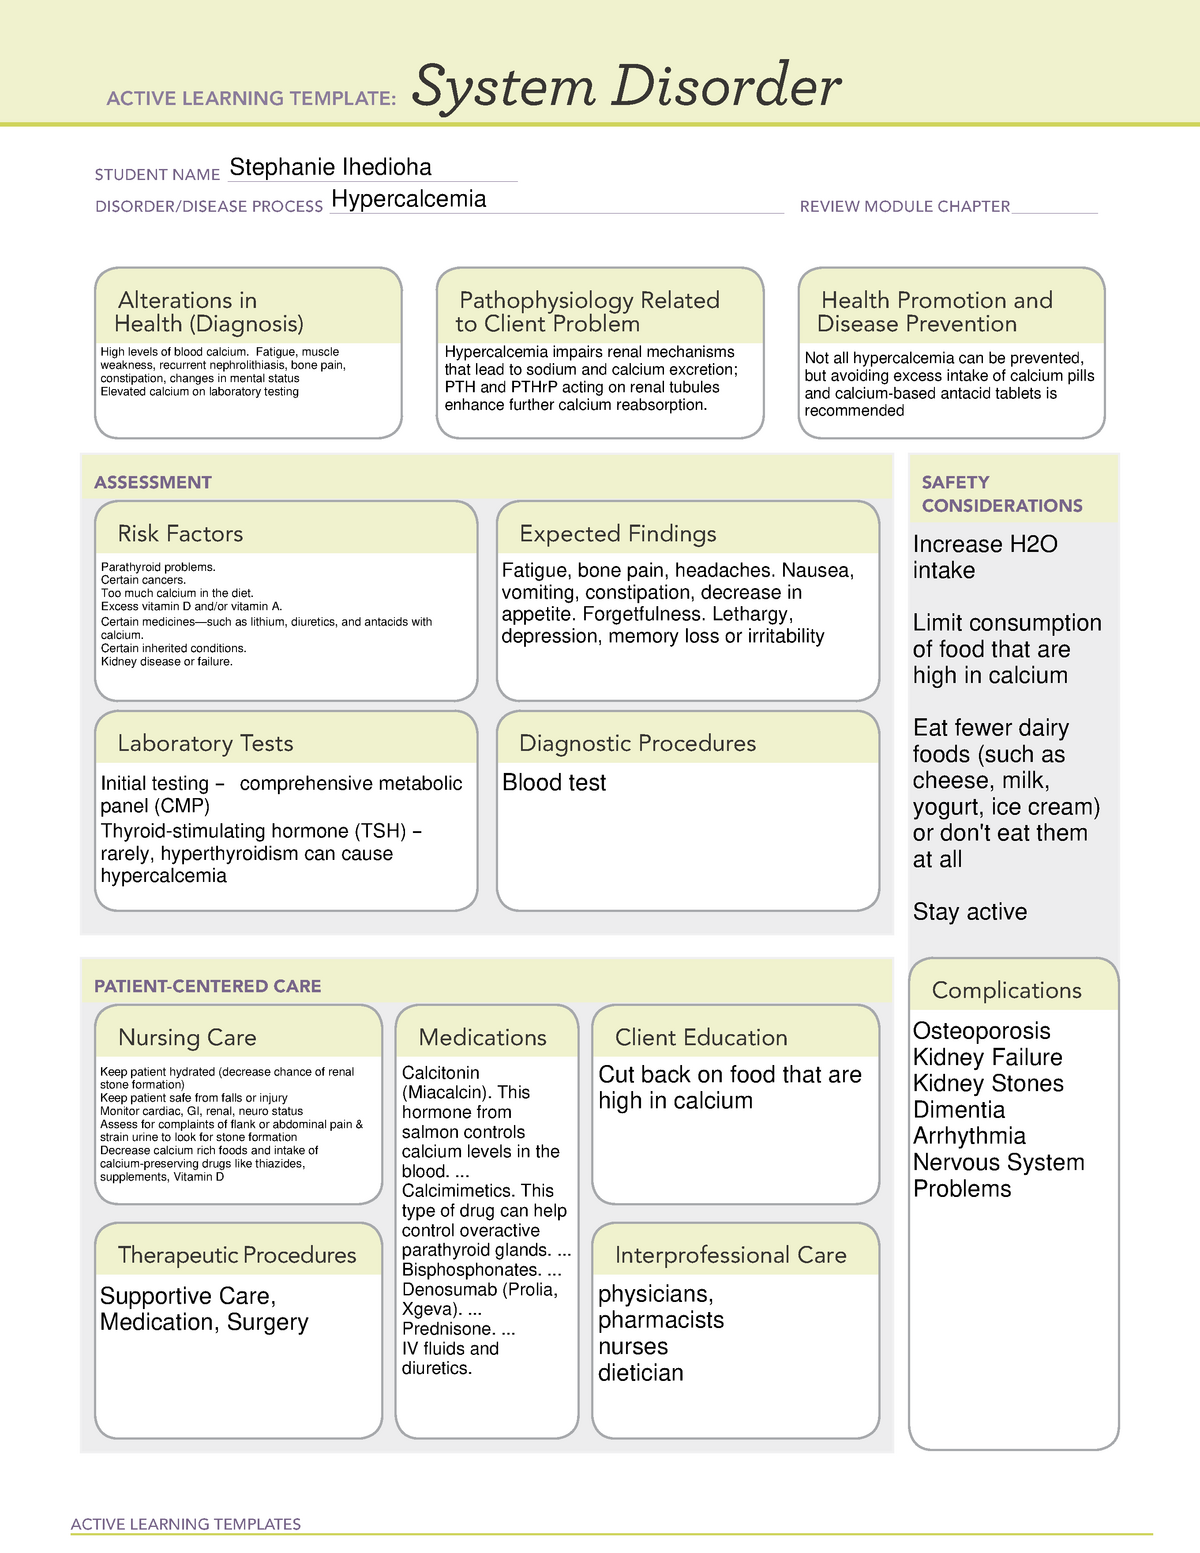 System Disorder Hypercalcemia ACTIVE LEARNING TEMPLATES System